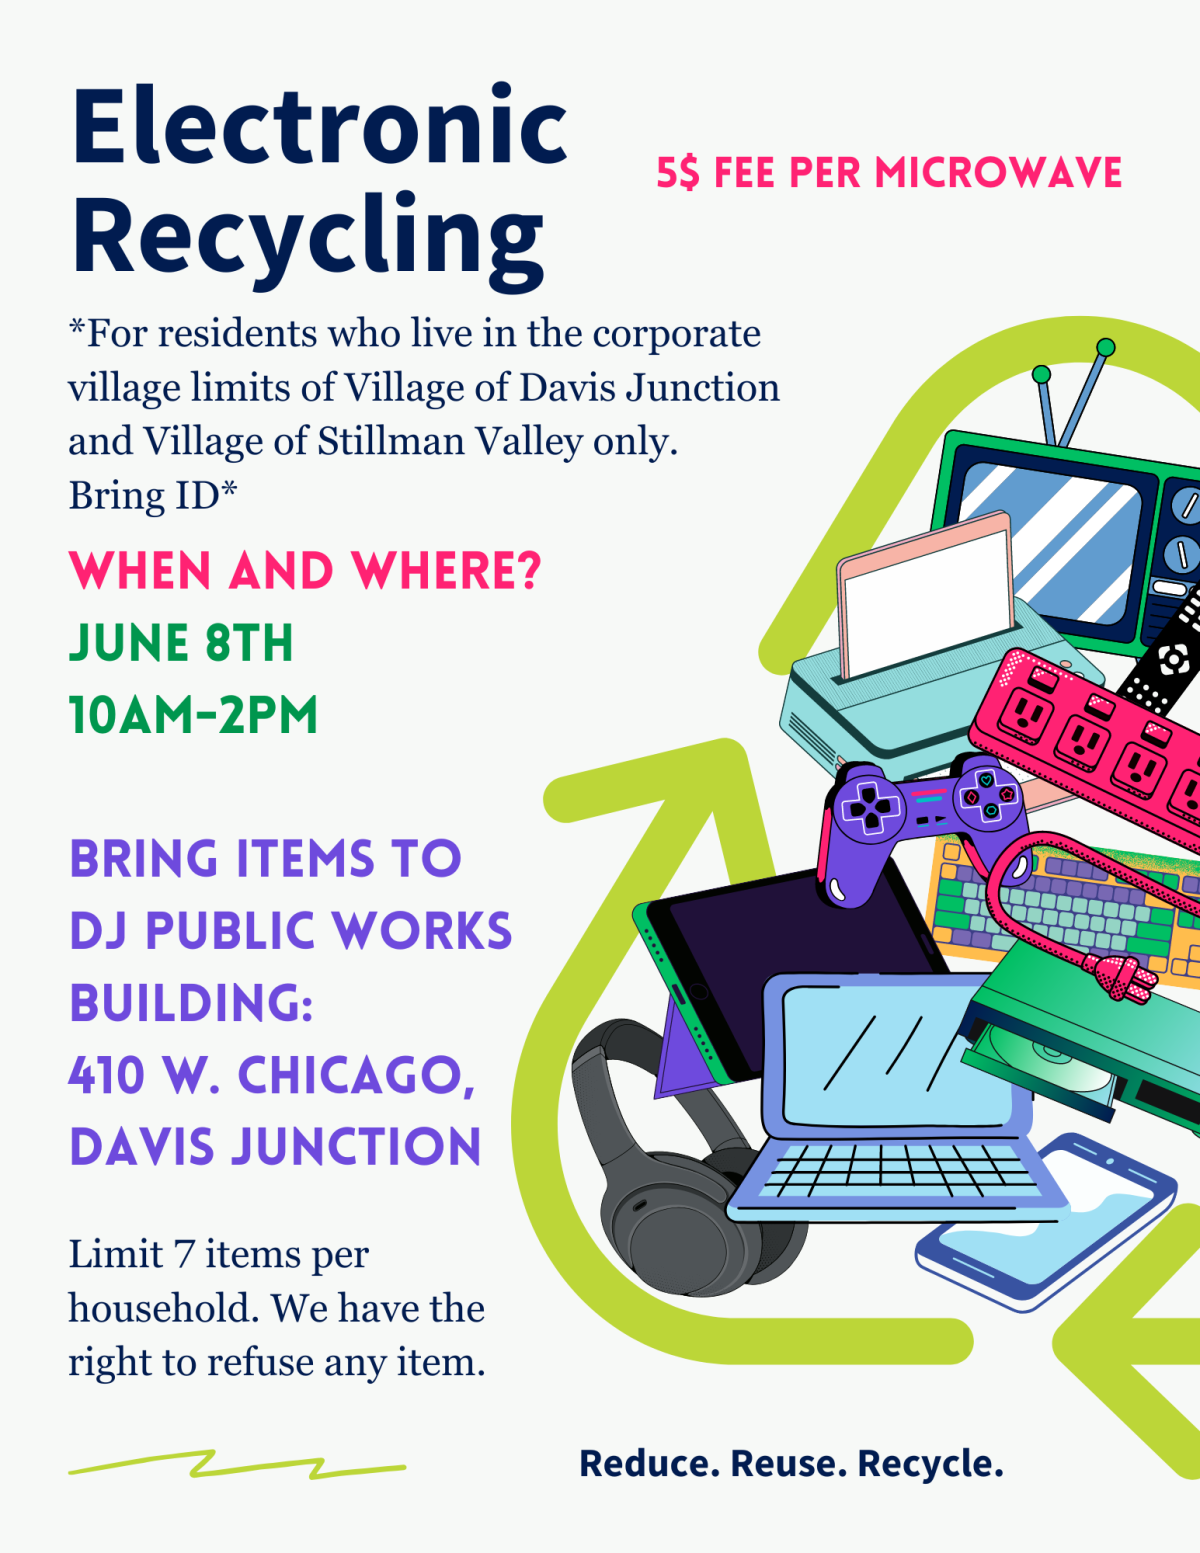 electronic recycling will be june 8th 10am-2pm at the public works building